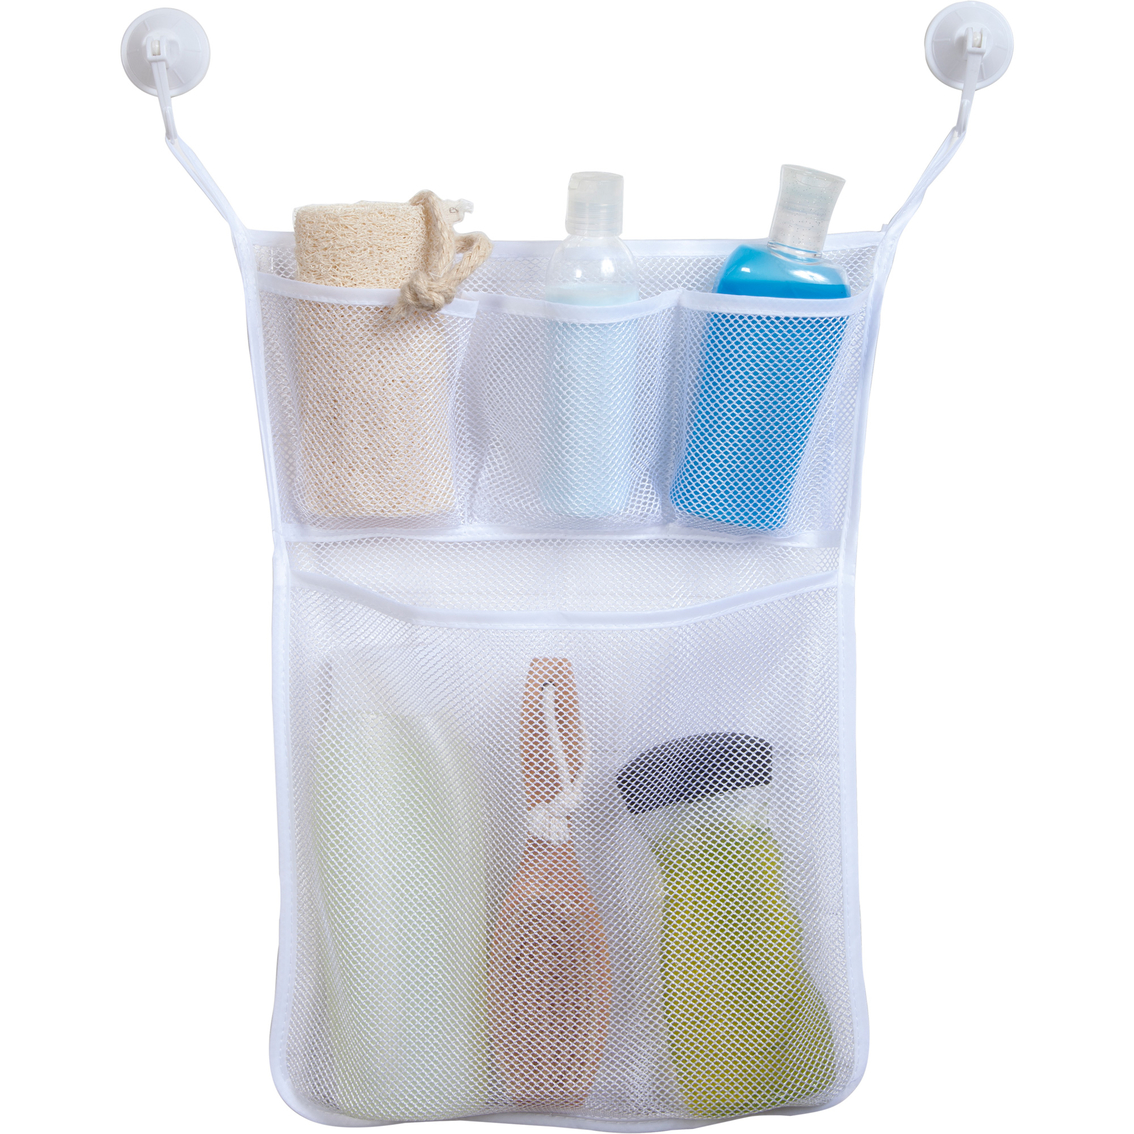 Kenney Four Pocket Hanging Mesh Suction Shower Organization Caddy - Image 2 of 2